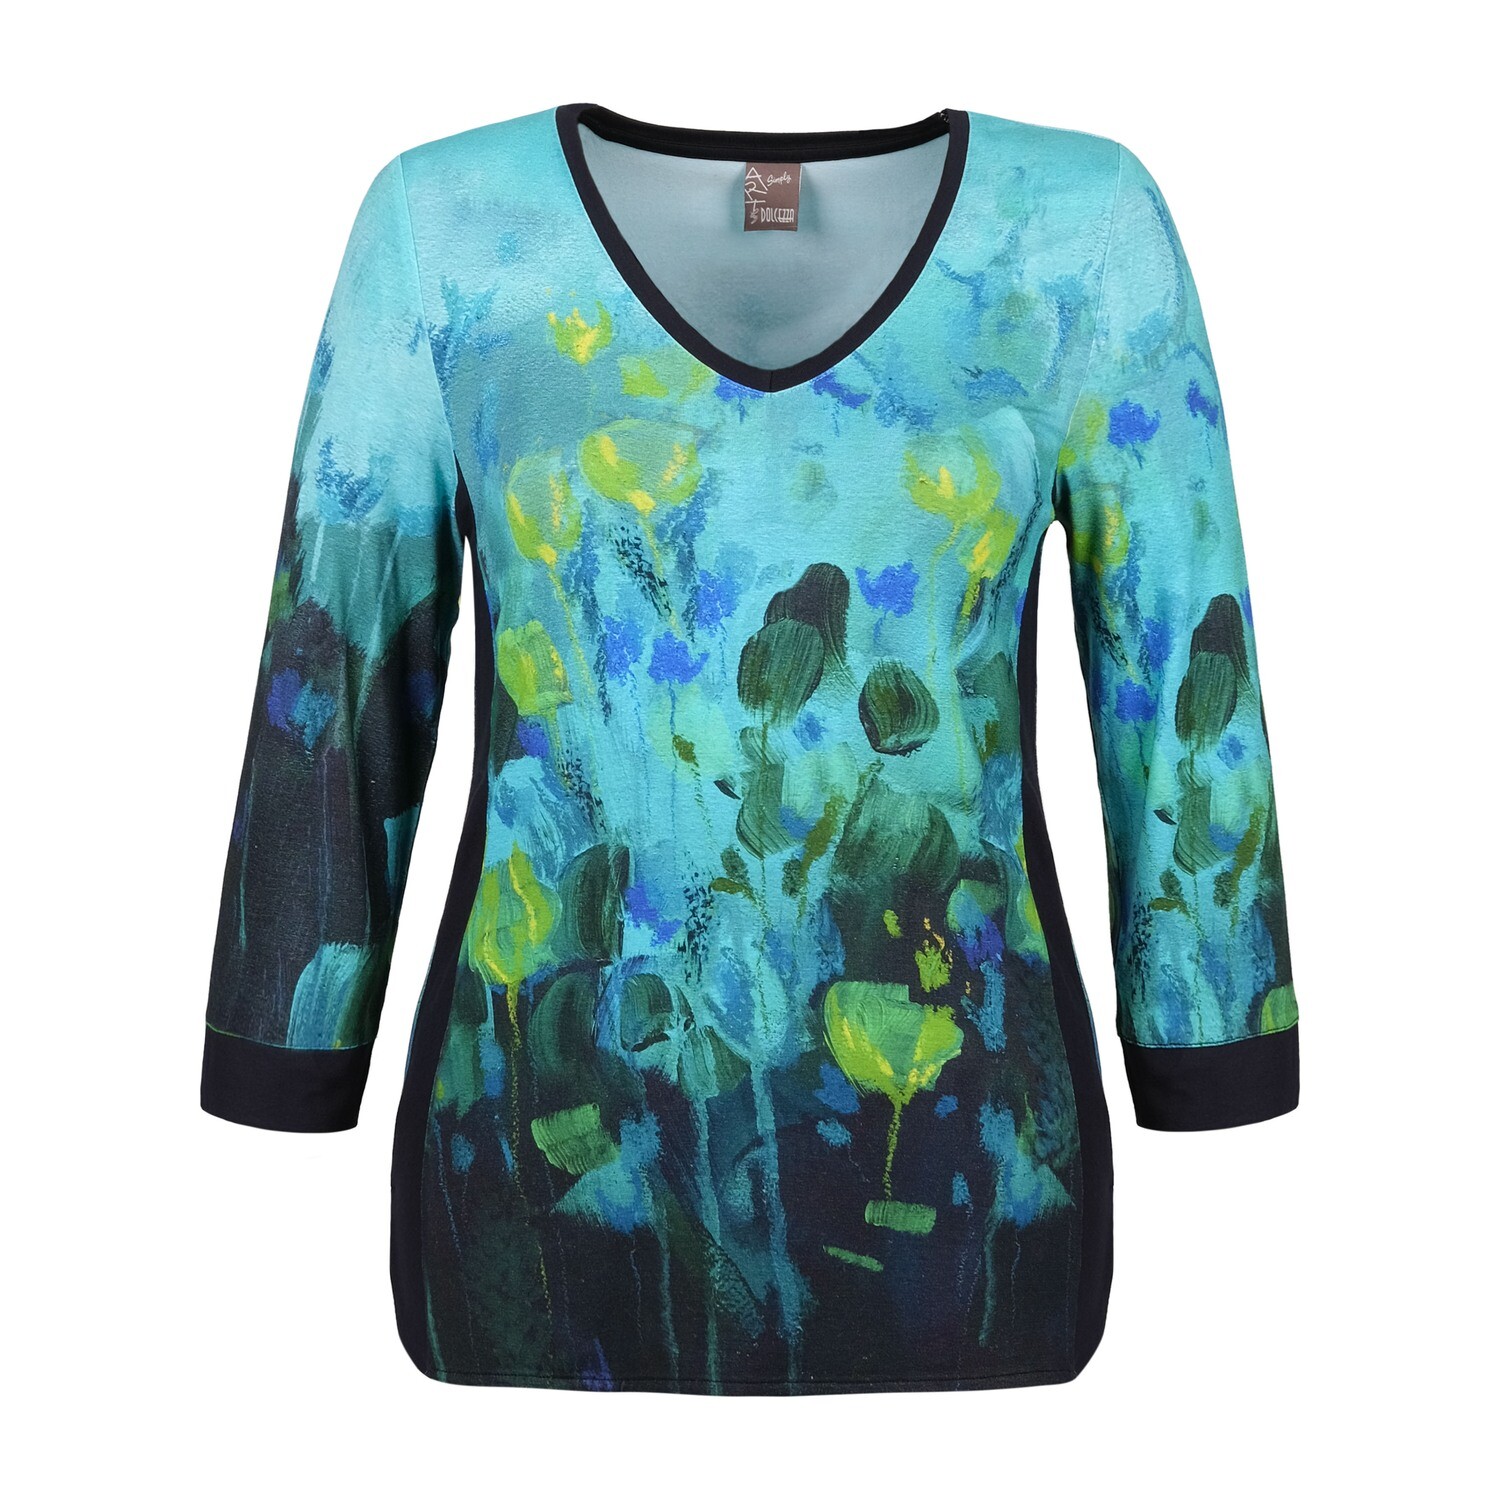 Simply Art Dolcezza: Fantaisie Floralge Abstract Art T-Shirt SOLD OUT